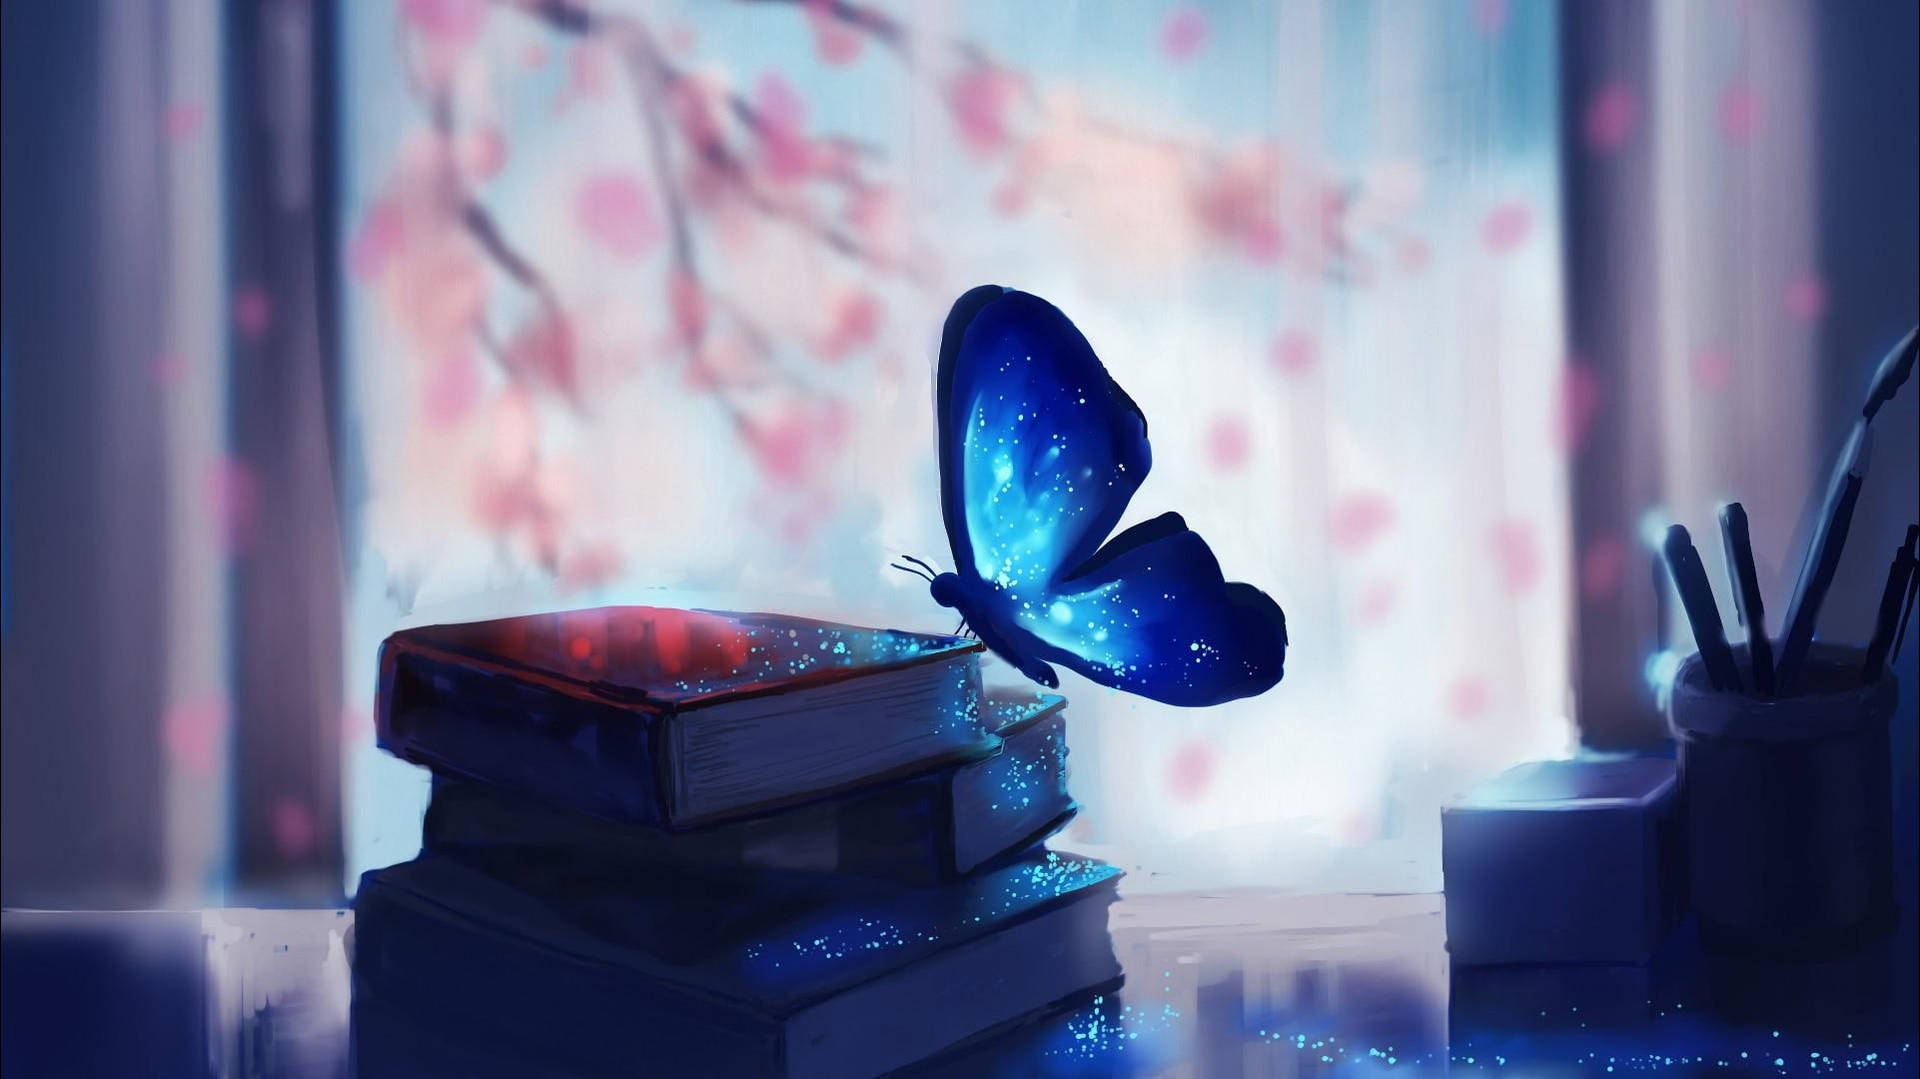 Dreamy Books And Butterfly